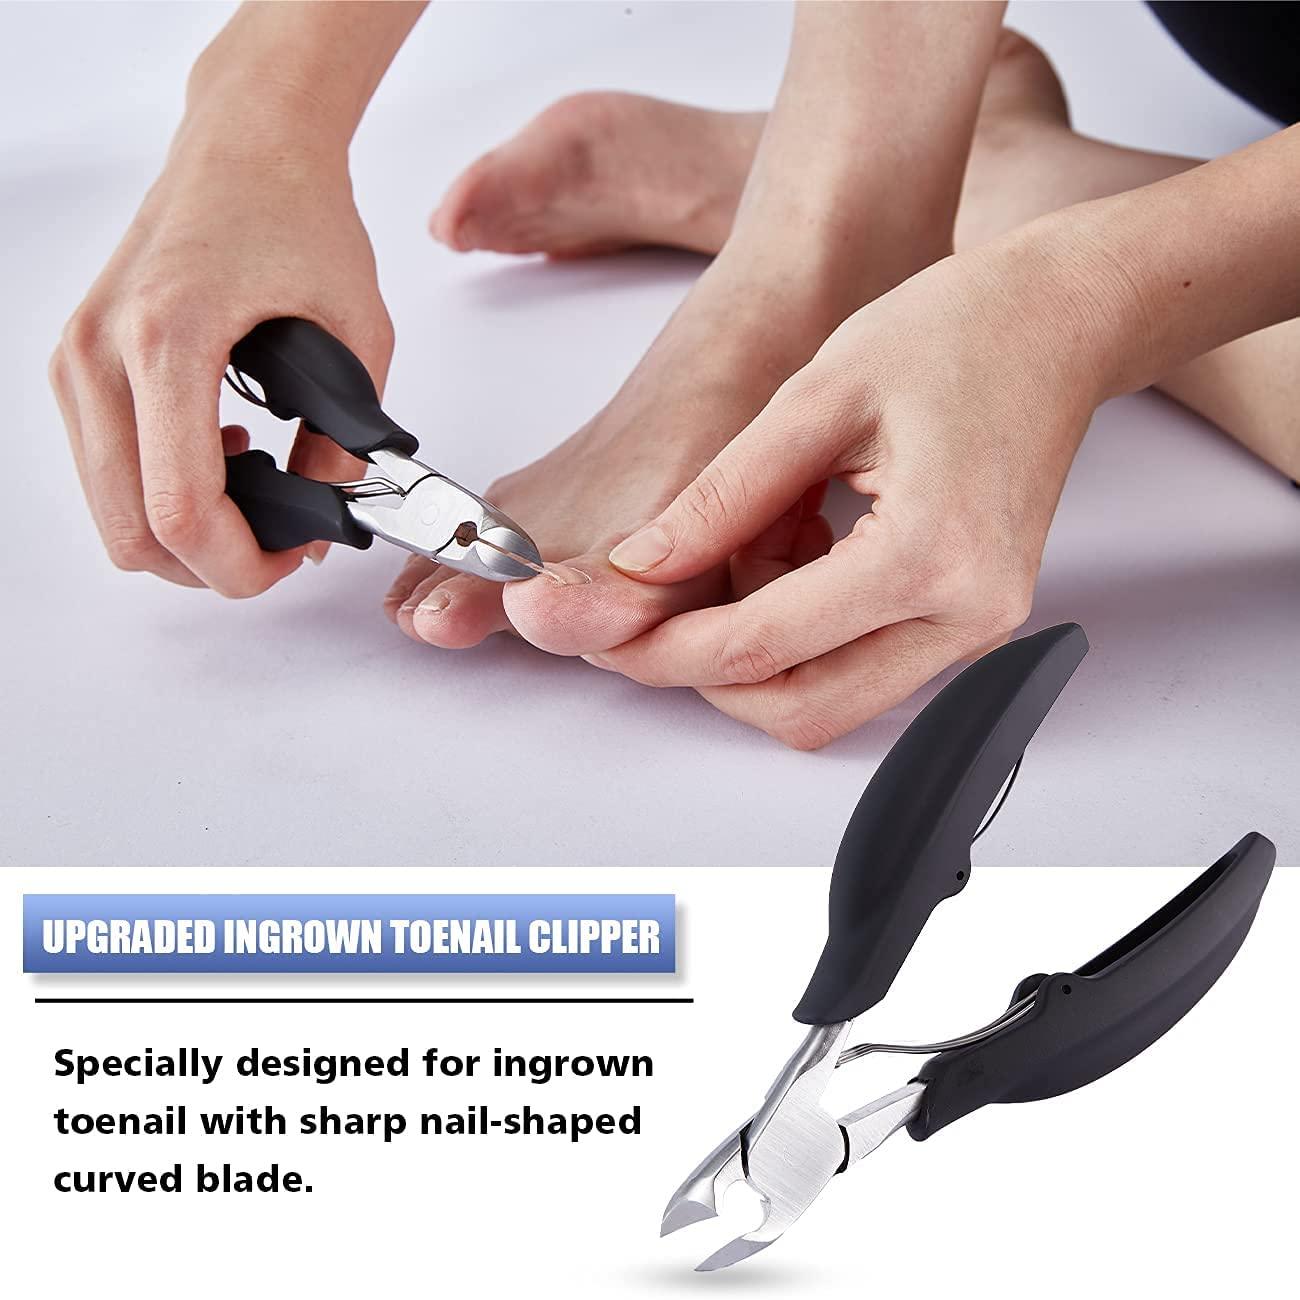 Fingernail and toenail clippers for Diabetes, The blades of…